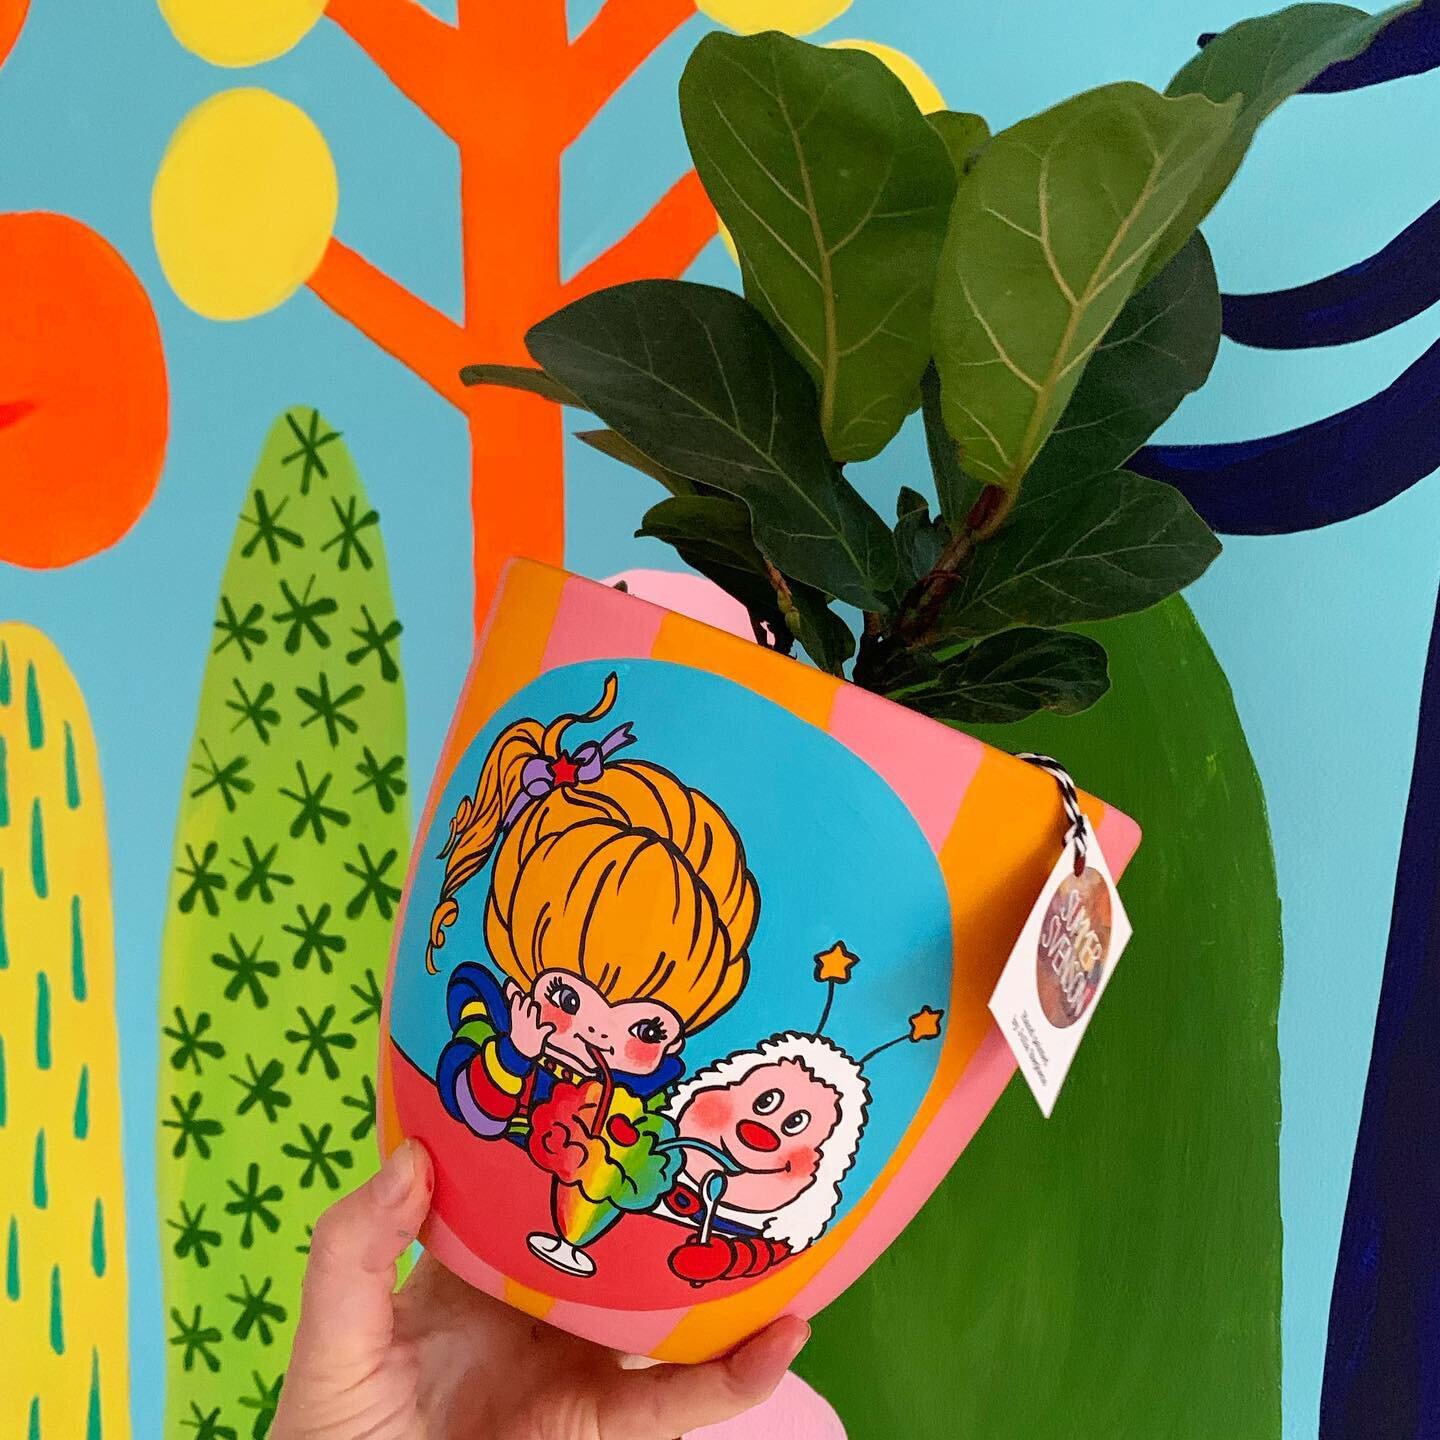 Having a Rainbow Sundae morning moment 🌈 

The 80s Fan art nostalgia Pots are all now en route to their fun new homes 🌈💖 Meanwhile.. *busily painting more pots* 👩&zwj;🎨 🎨 🙃
.
.
.
.
.
.

#rainbow #rainbowbrite #80stoys #80stoysrule #thegoldenag